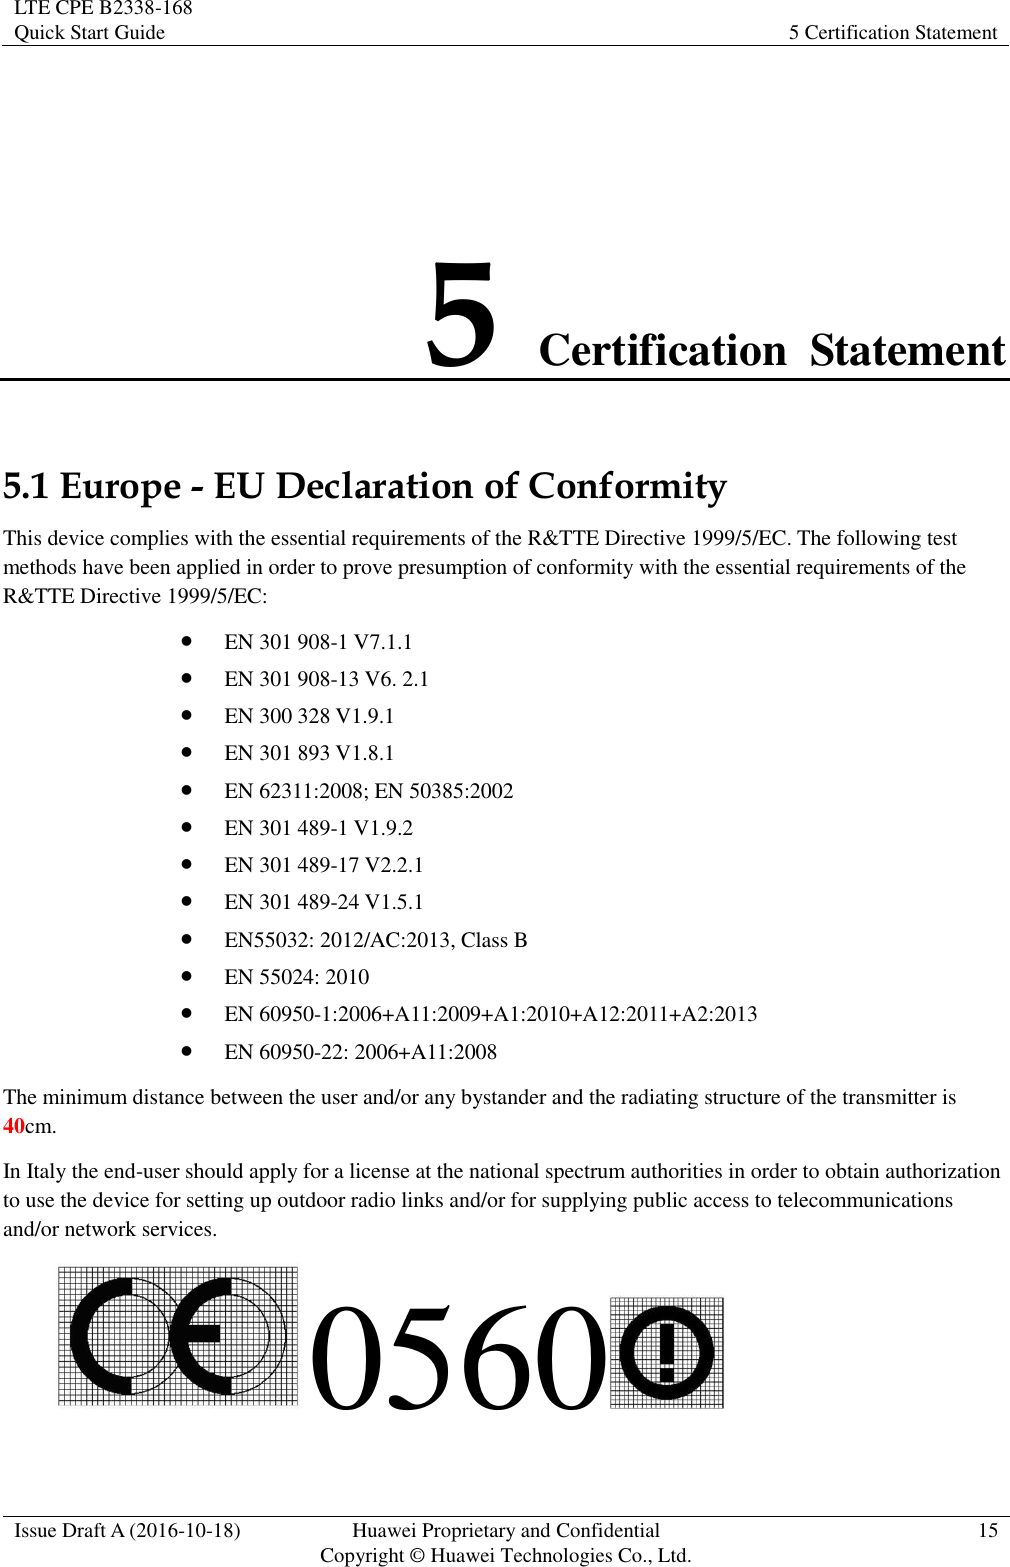 LTE CPE B2338-168   Quick Start Guide 5 Certification Statement  Issue Draft A (2016-10-18) Huawei Proprietary and Confidential                                     Copyright ©  Huawei Technologies Co., Ltd. 15  5 Certification  Statement 5.1 Europe - EU Declaration of Conformity This device complies with the essential requirements of the R&amp;TTE Directive 1999/5/EC. The following test methods have been applied in order to prove presumption of conformity with the essential requirements of the R&amp;TTE Directive 1999/5/EC:  EN 301 908-1 V7.1.1  EN 301 908-13 V6. 2.1  EN 300 328 V1.9.1  EN 301 893 V1.8.1  EN 62311:2008; EN 50385:2002  EN 301 489-1 V1.9.2    EN 301 489-17 V2.2.1  EN 301 489-24 V1.5.1  EN55032: 2012/AC:2013, Class B  EN 55024: 2010  EN 60950-1:2006+A11:2009+A1:2010+A12:2011+A2:2013  EN 60950-22: 2006+A11:2008 The minimum distance between the user and/or any bystander and the radiating structure of the transmitter is 40cm. In Italy the end-user should apply for a license at the national spectrum authorities in order to obtain authorization to use the device for setting up outdoor radio links and/or for supplying public access to telecommunications and/or network services.  0560  